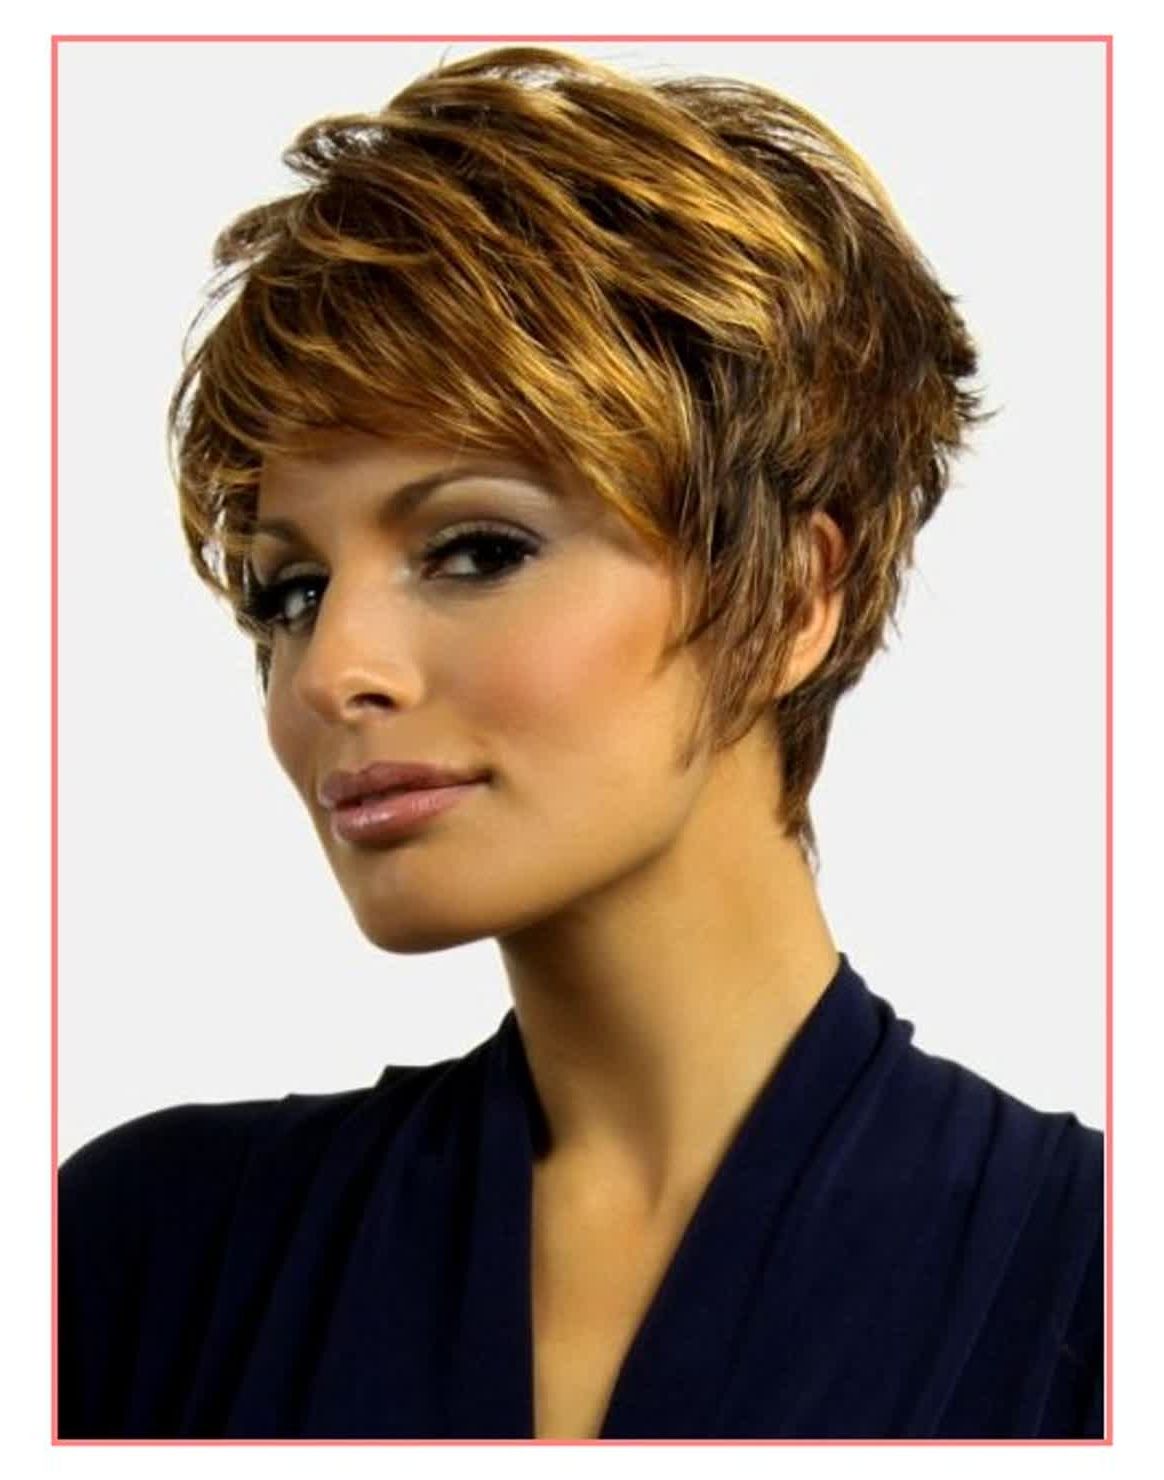 Find Out Full Gallery Of Good Short Haircuts For Thick Frizzy Hair Within Short Haircuts For Thick Curly Hair (View 5 of 25)